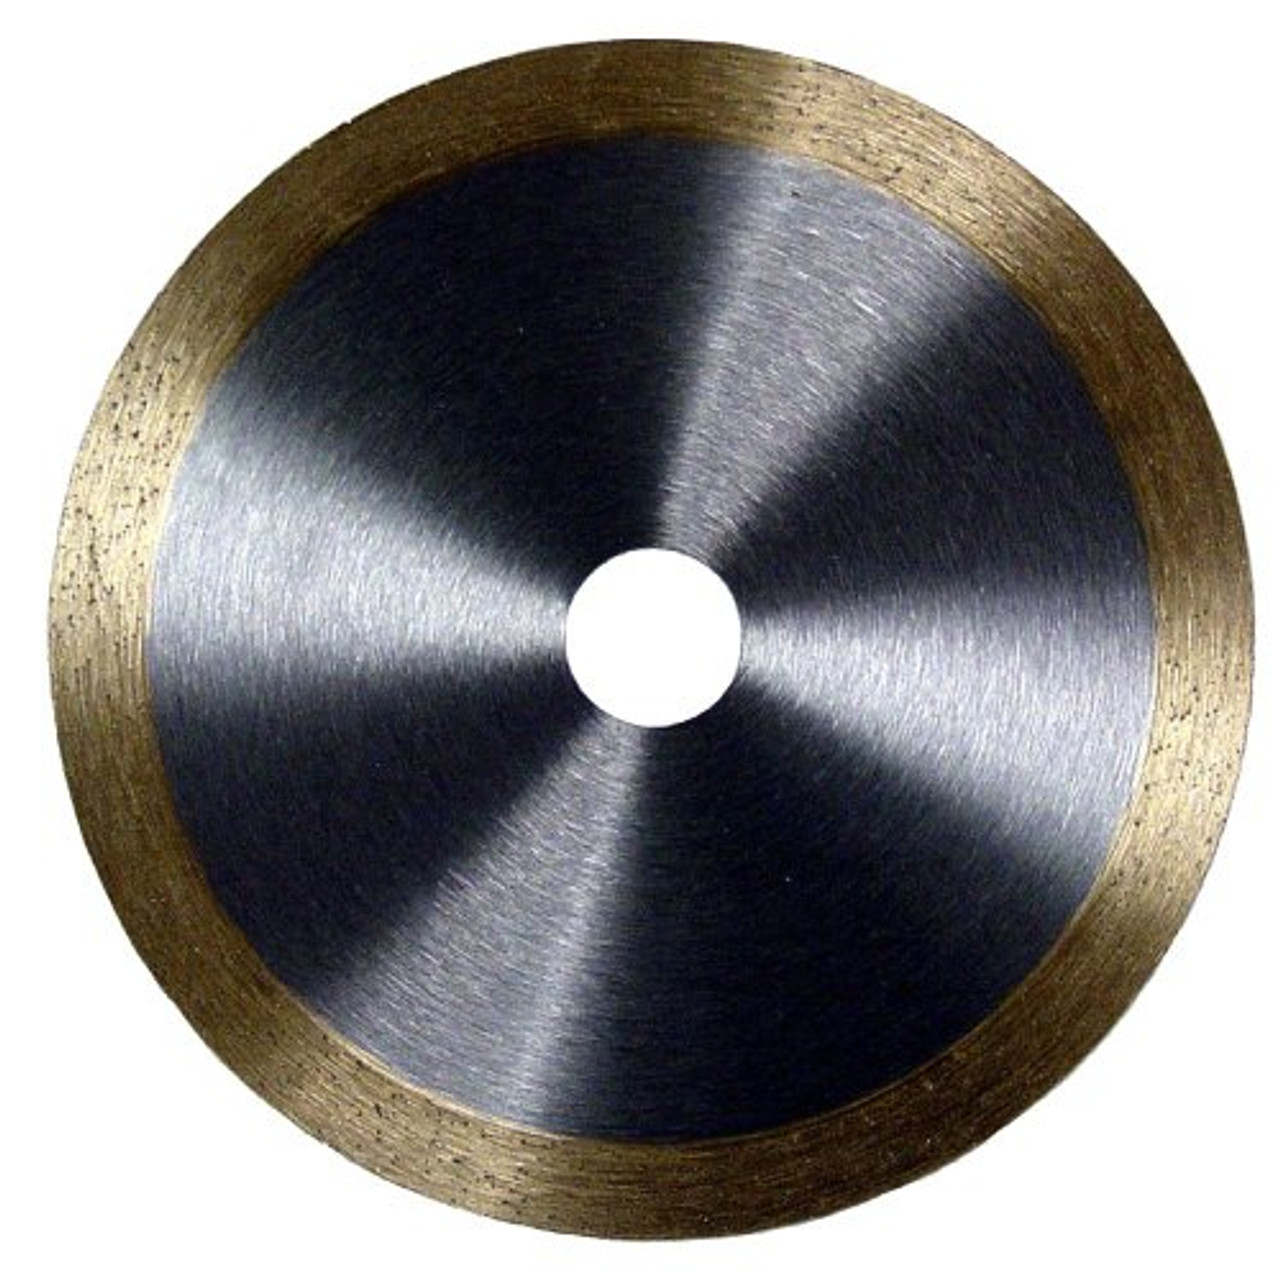 Diamond Products Core Cut 20751 Delux-Cut Dry Tile Blade, 10"